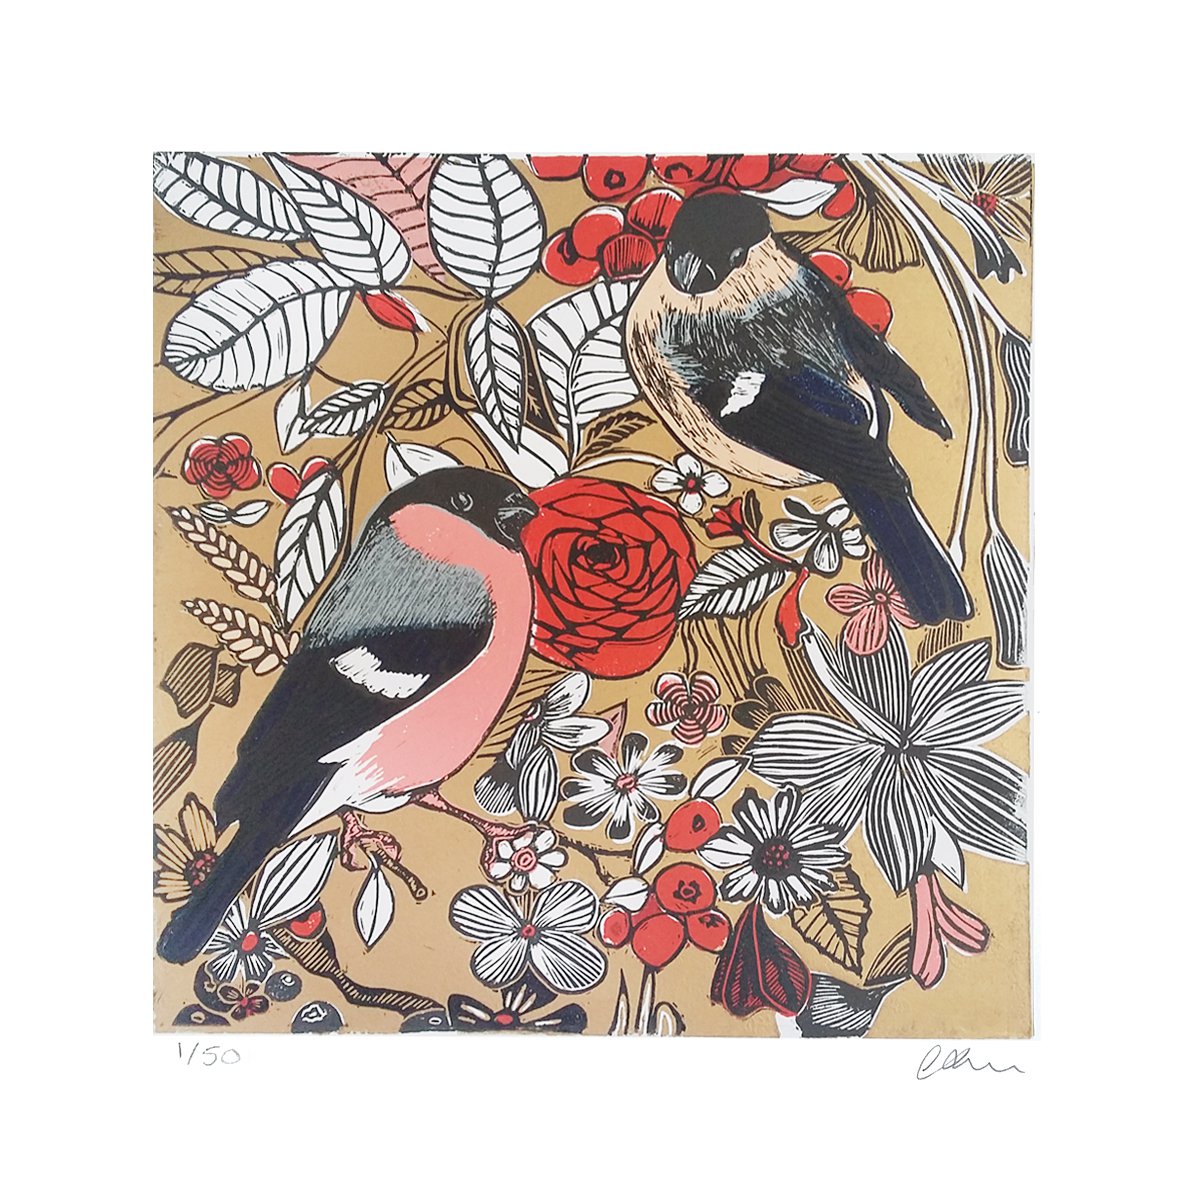 Bullfinches chinoiserie by Carolynne Coulson